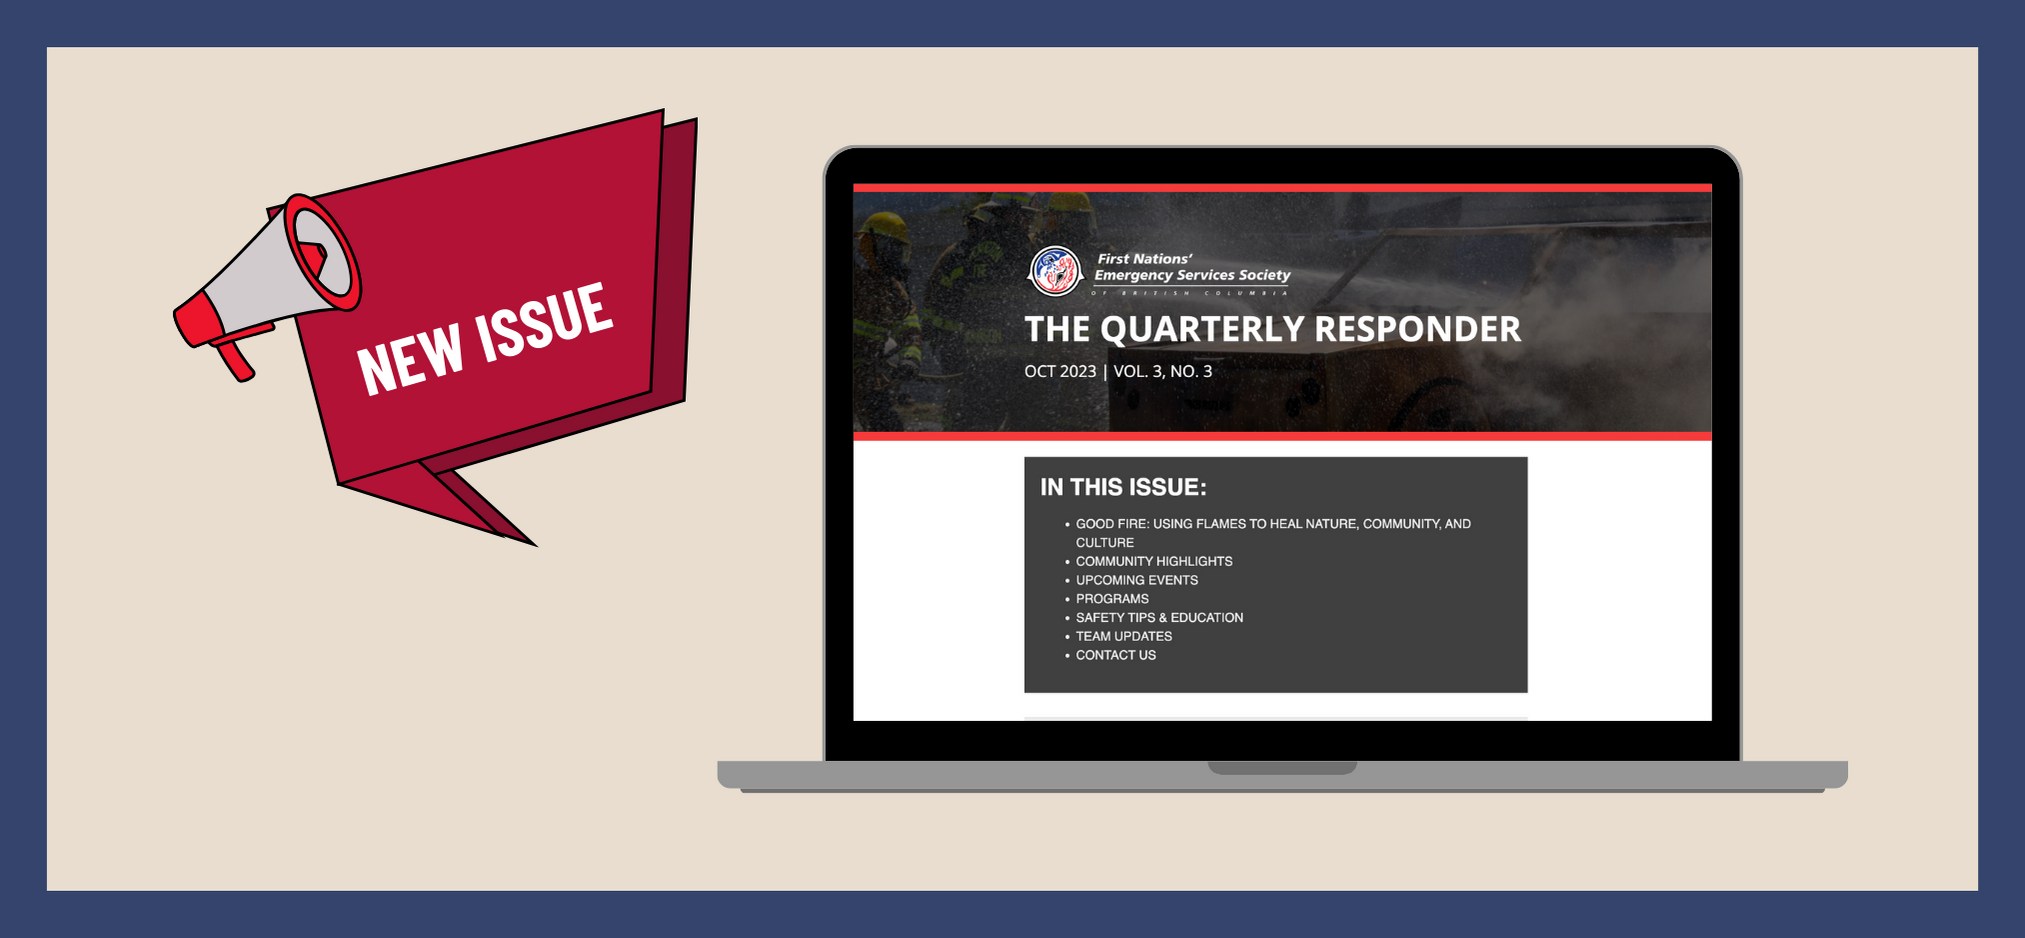 New issue of the quarterly responder. Graphic of what the newsletter looks like on a laptop